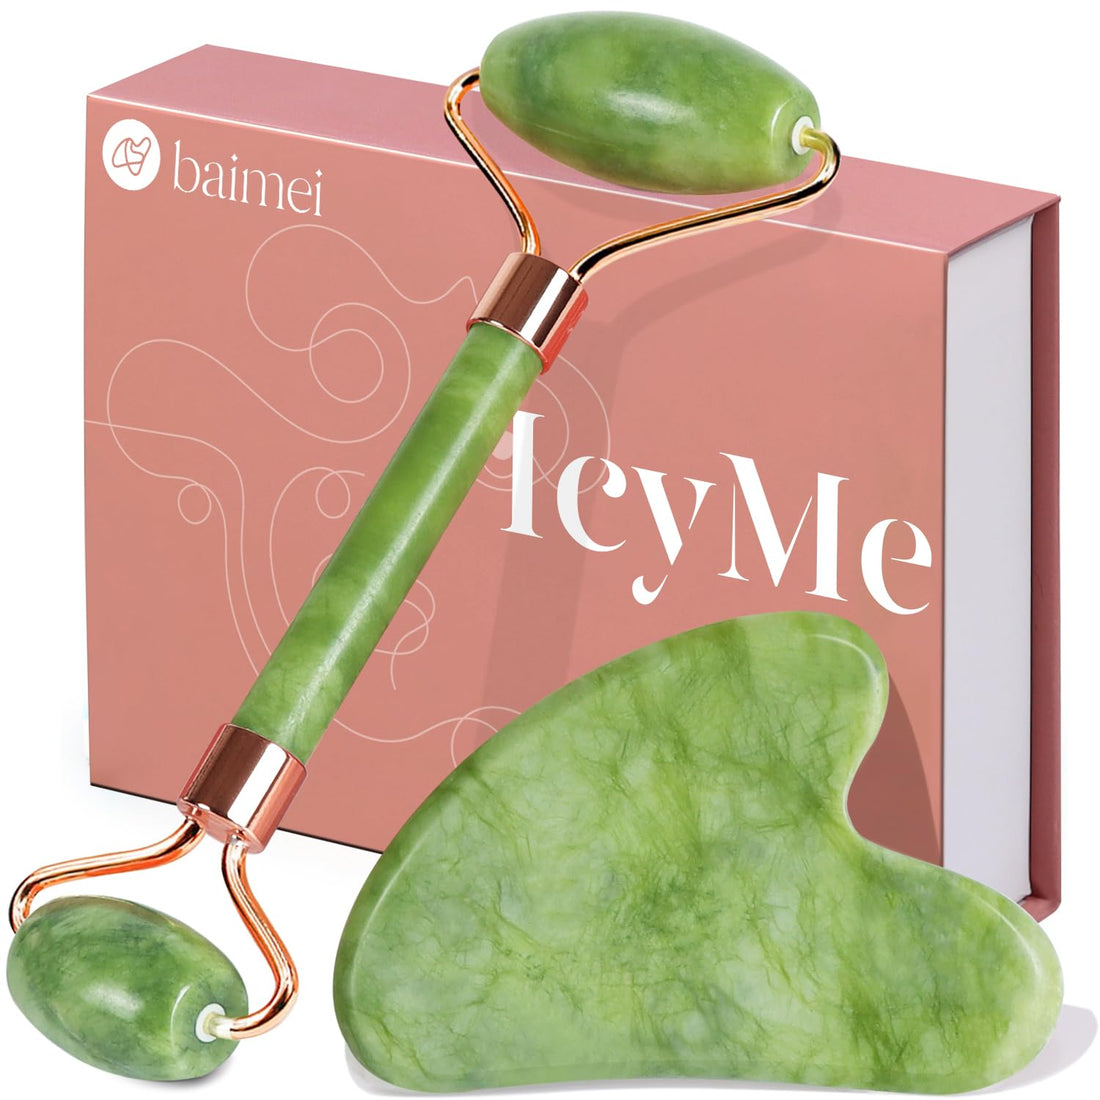 Icyme Gua Sha &amp; Jade Roller Facial Tools Face Roller and Gua Sha Set for Puffiness and Redness Reducing Skin Care Routine, Self Care Gift for Men Women - Green - HealthFulBeautyLife